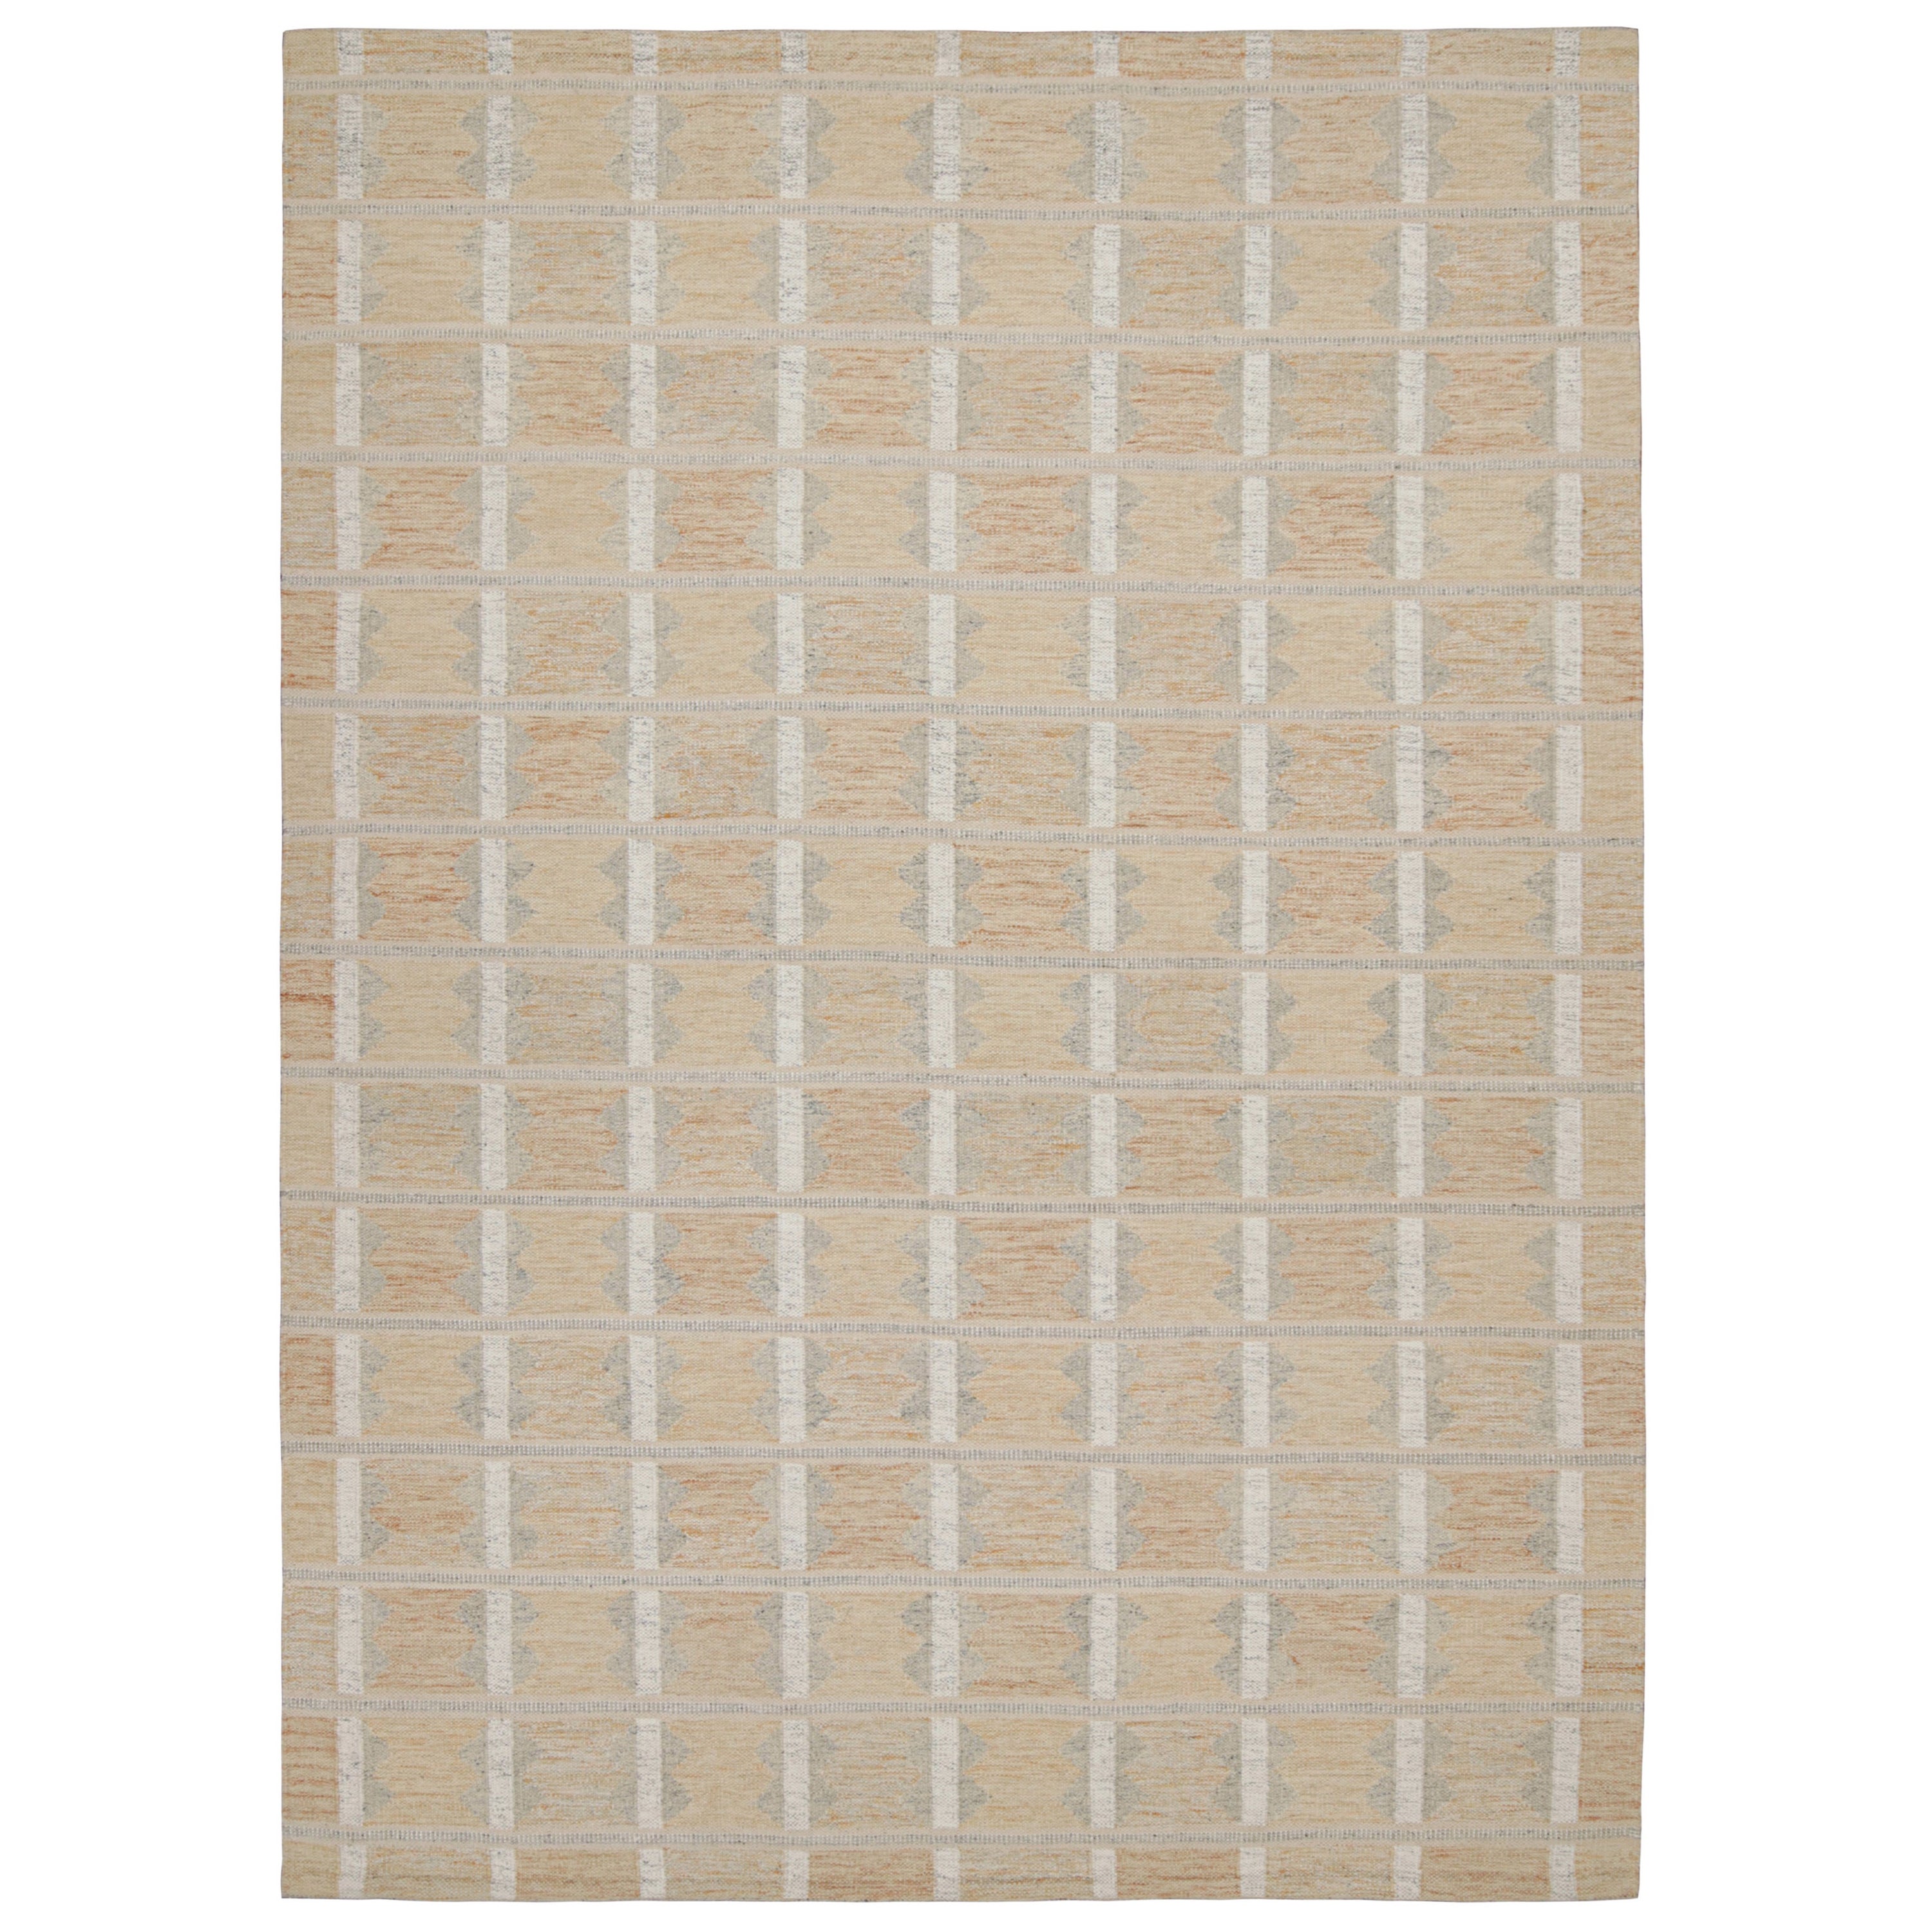 Rug & Kilim’s Scandinavian Style Kilim in Ivory & Off white Geometric Patterns For Sale